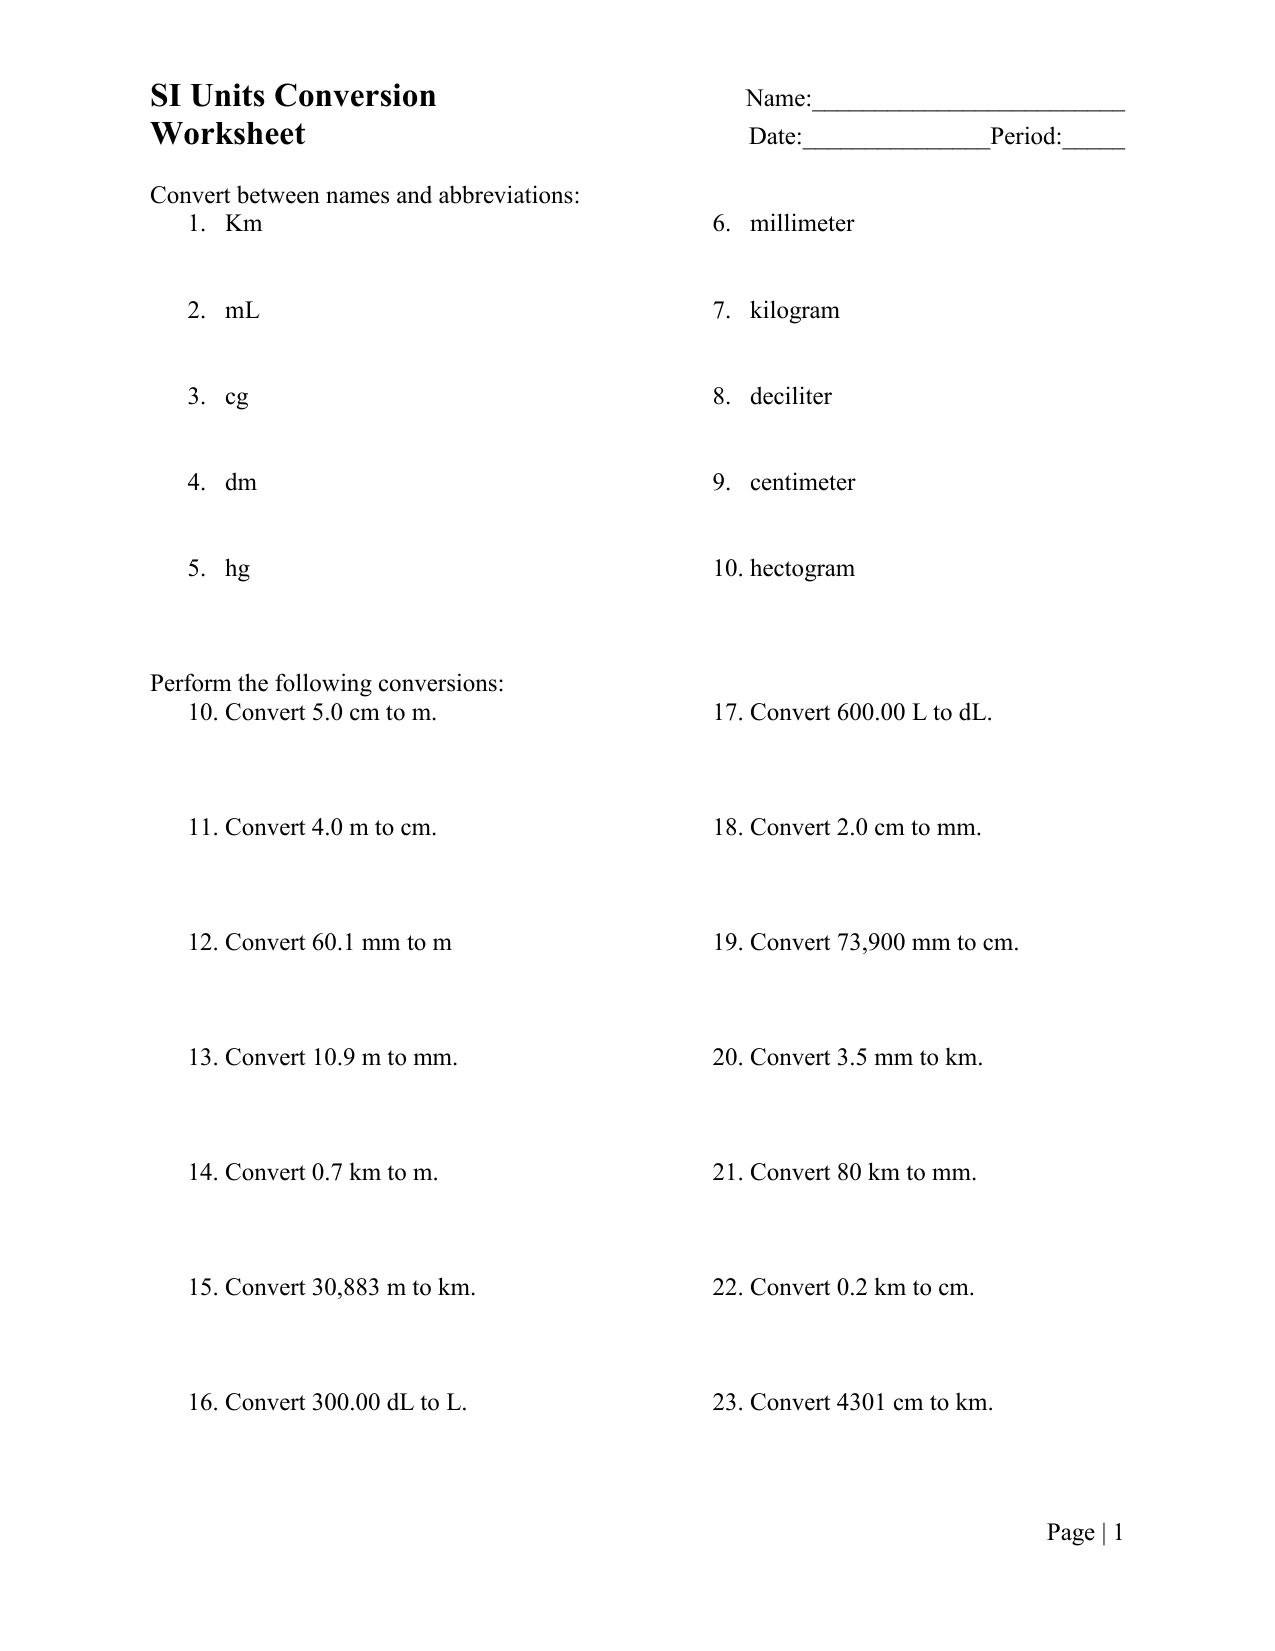 SI-Units-Conversions For Si Unit Conversion Worksheet